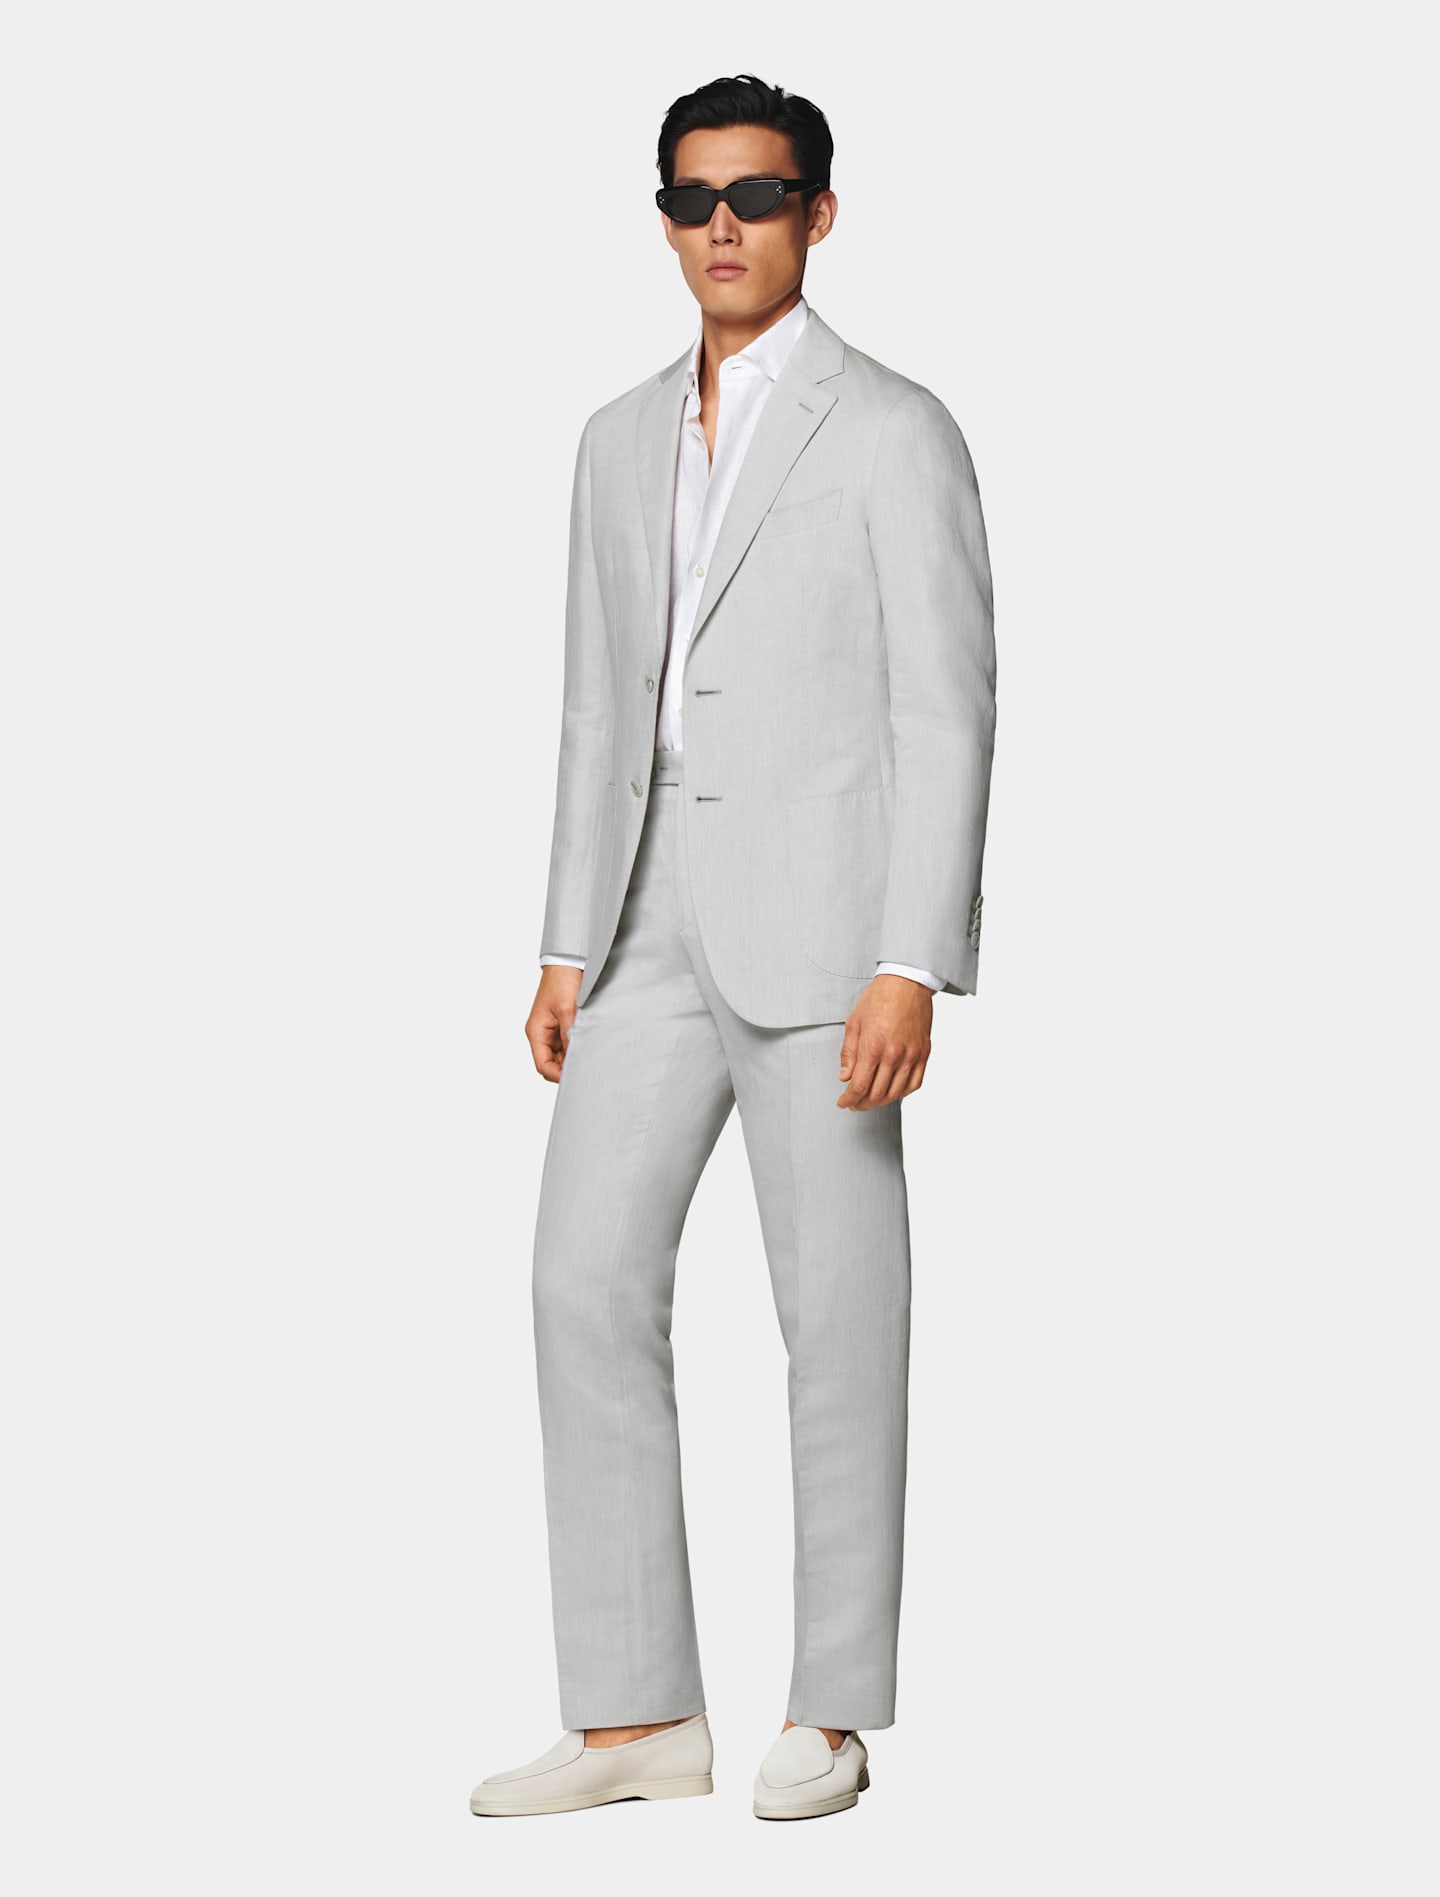 Single-breasted light grey suit worn with loosely buttoned white shirt and light tape loafers.